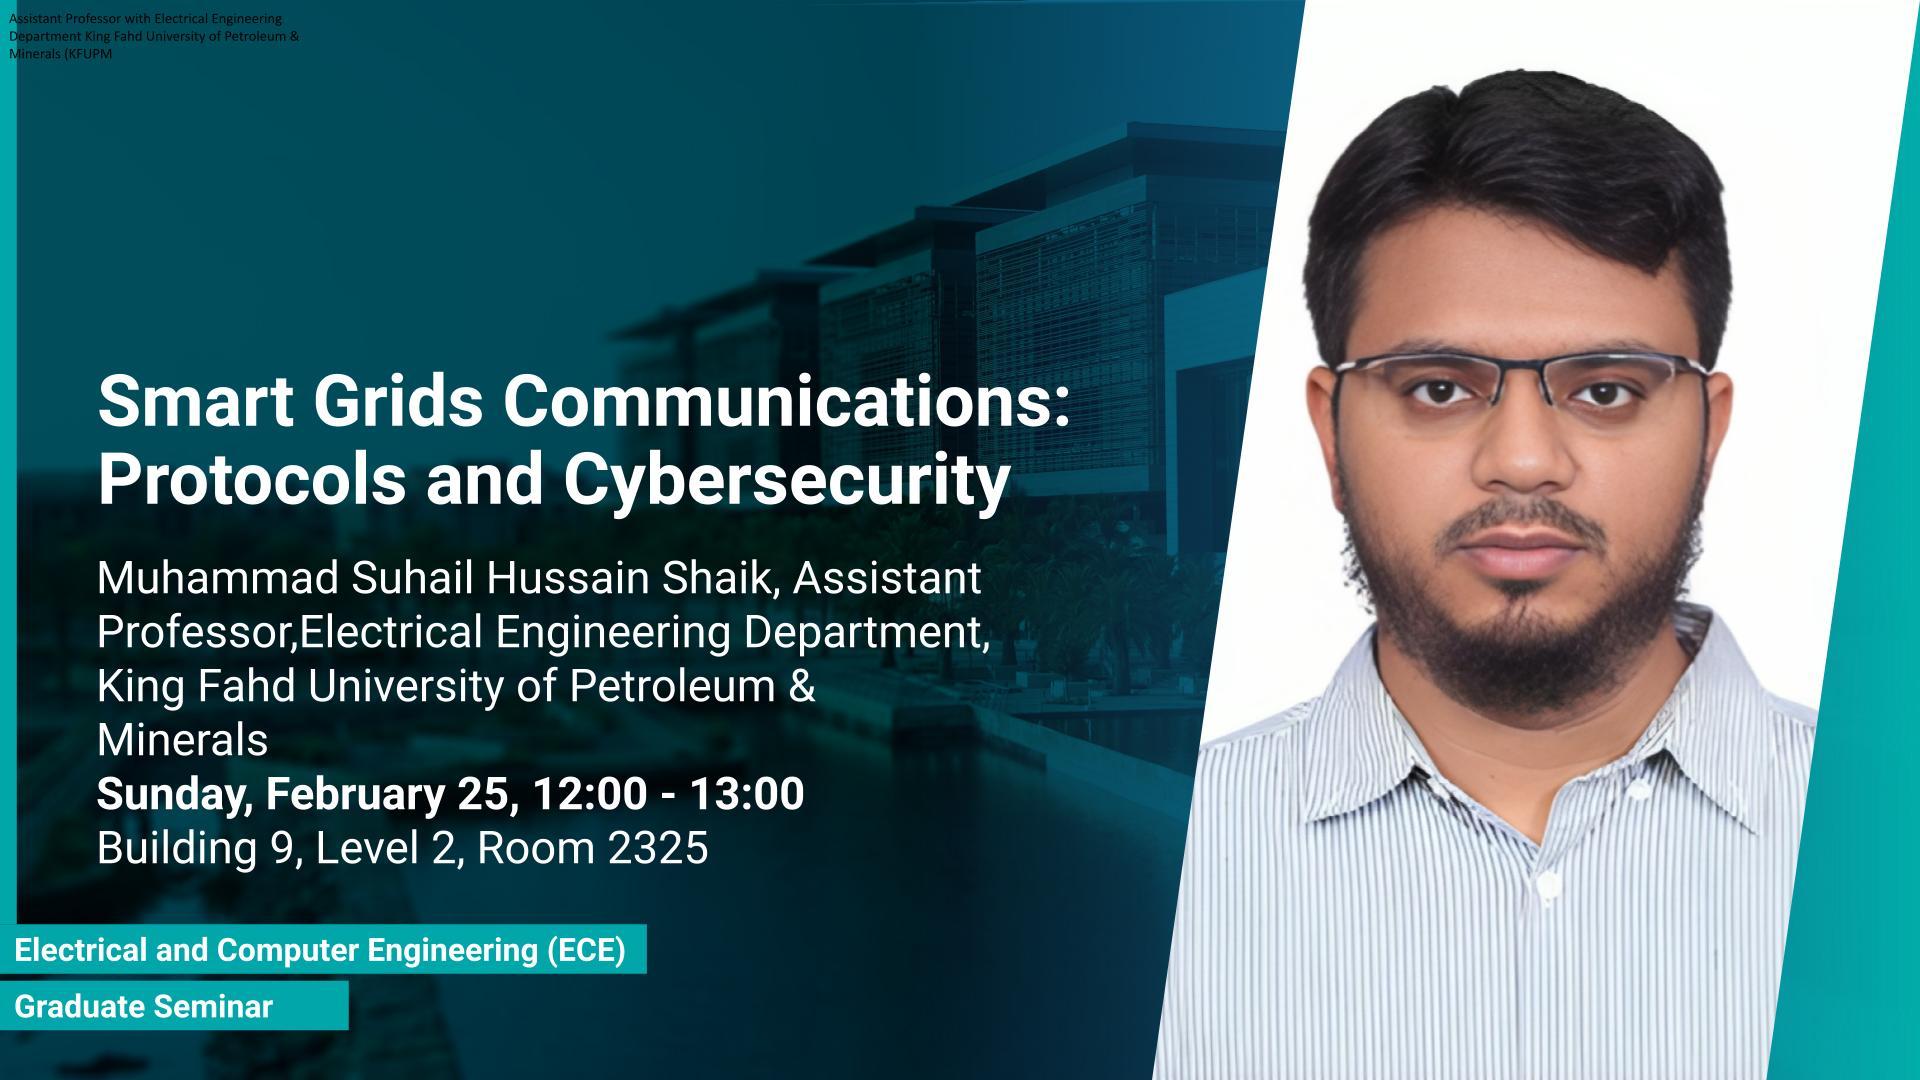 KAUST-CEMSE-ECE-Prof-Suhail -Shaik-Smart-Grids-Communications_-Protocols-and-Cybersecurity (1).jpg